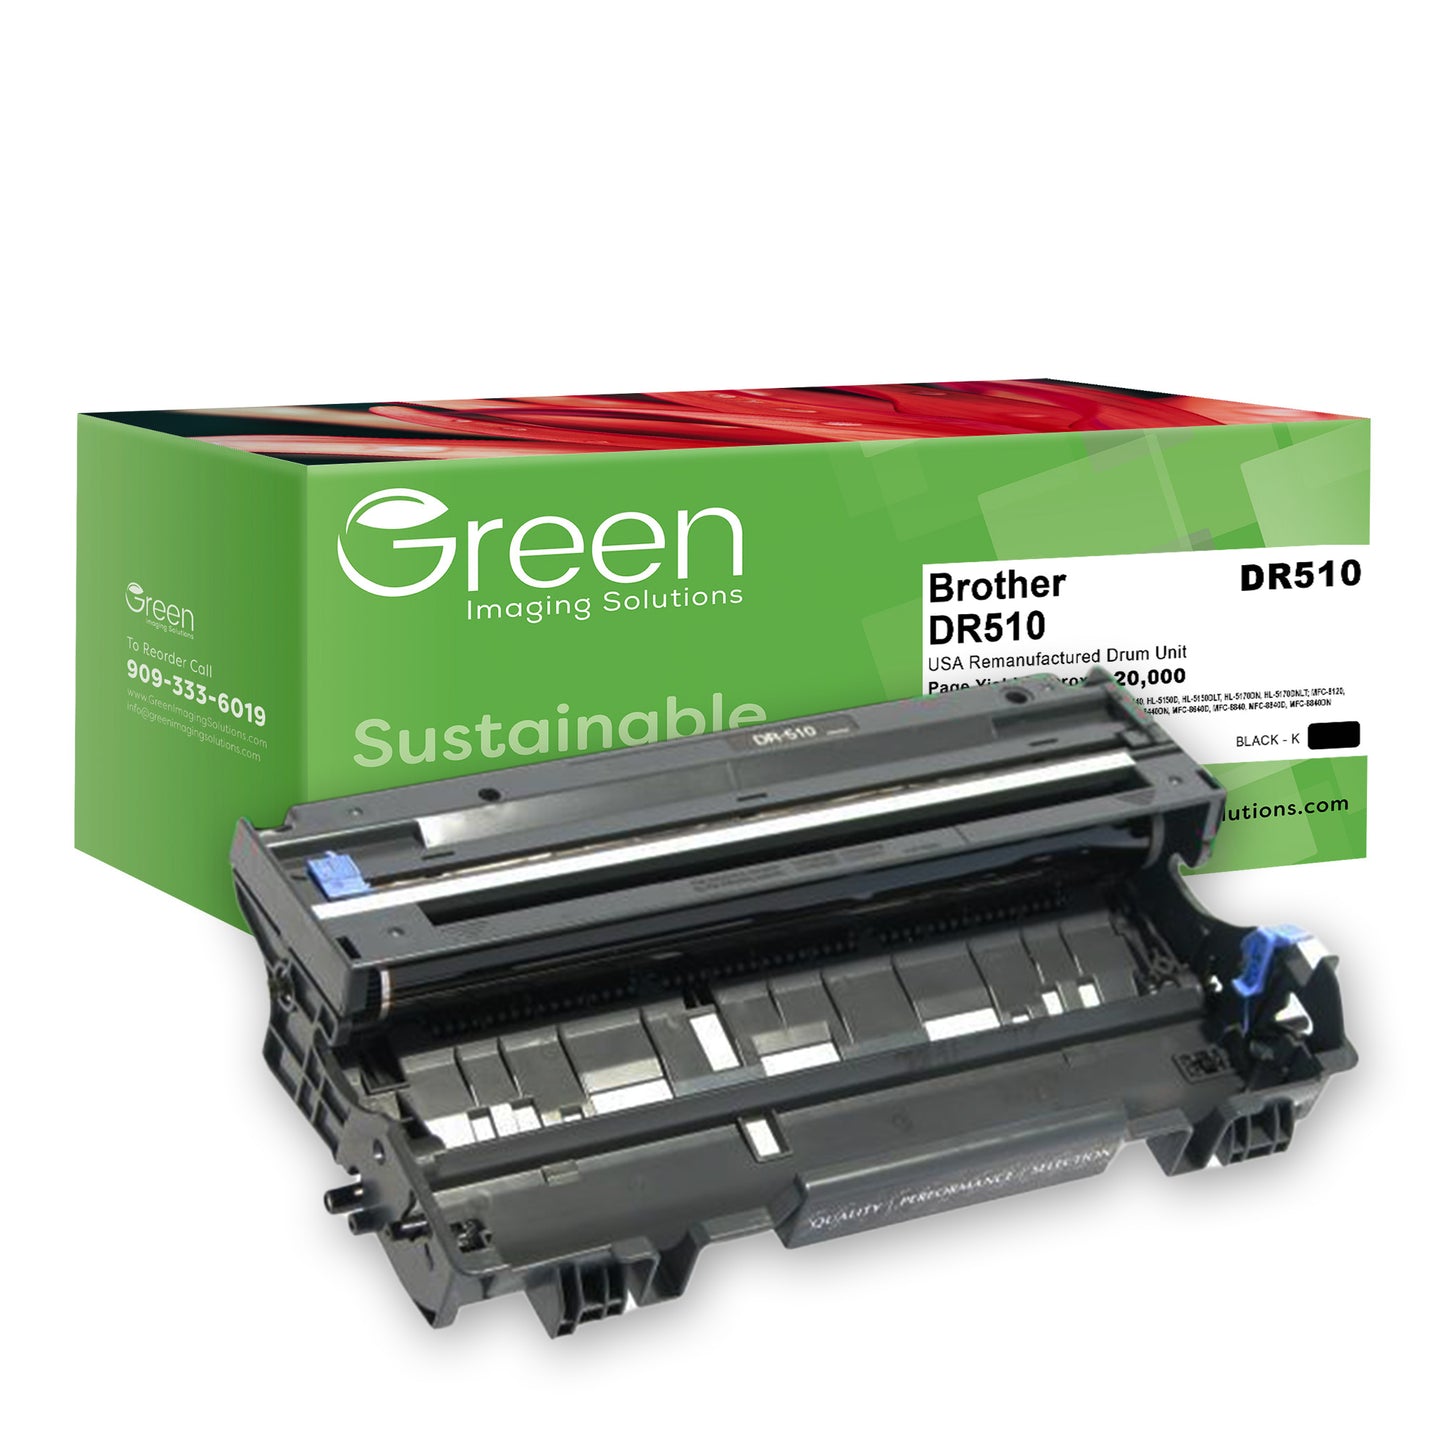 Green Imaging Solutions USA Remanufactured Drum Unit for Brother DR510